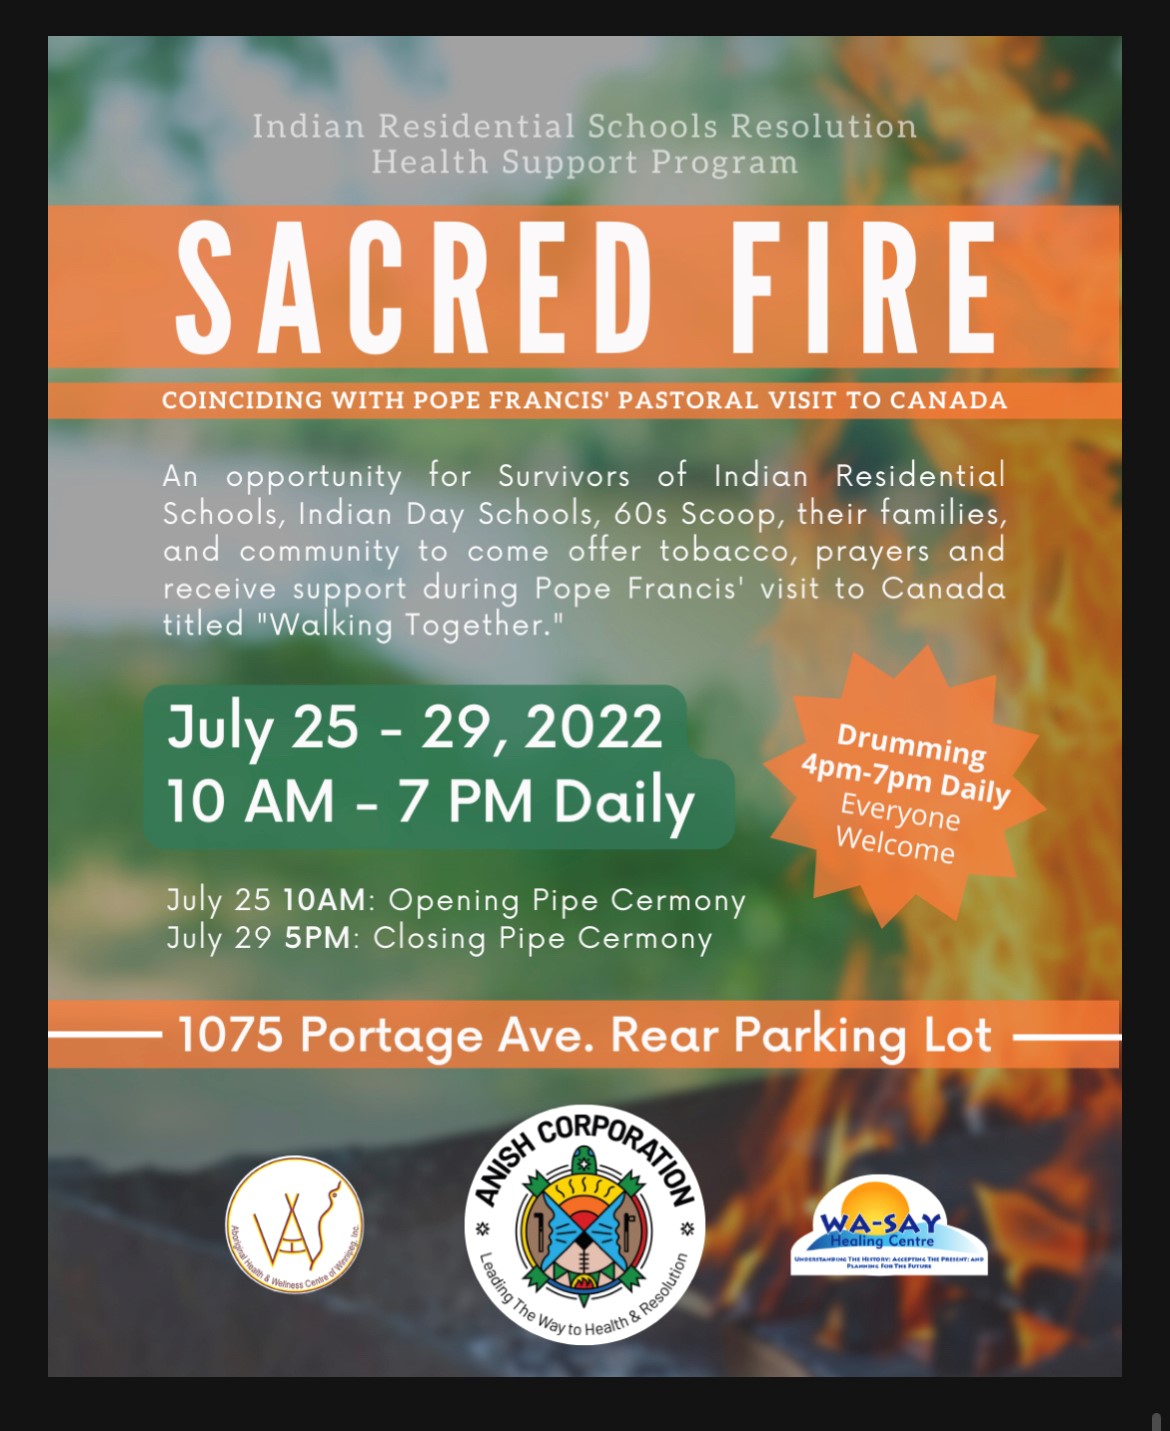 https://www.gov.mb.ca/inr/irs/images/anish-sacred-fire-event-poster.jpg